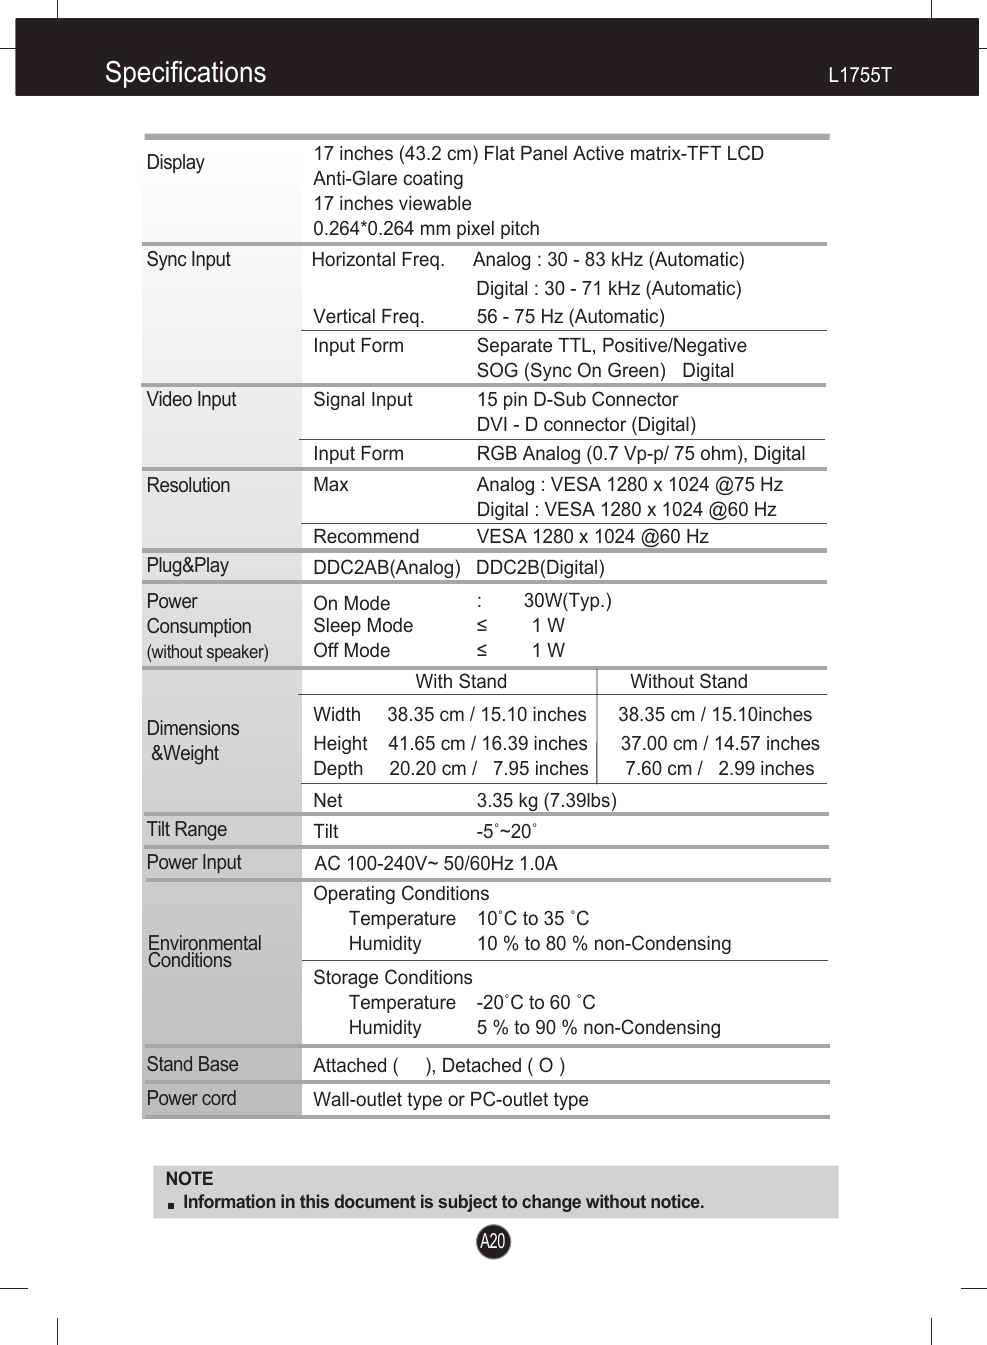 Specifications               L1755TNOTEInformation in this document is subject to change without notice.A20DisplaySync InputVideo InputResolutionPlug&amp;PlayPowerConsumption(without speaker)Dimensions&amp;WeightTilt RangePower InputEnvironmentalConditionsStand Base Power cord 17 inches (43.2 cm) Flat Panel Active matrix-TFT LCD Anti-Glare coating17 inches viewable0.264*0.264 mm pixel pitchHorizontal Freq. Analog : 30 - 83 kHz (Automatic)Digital : 30 - 71 kHz (Automatic)Vertical Freq. 56 - 75 Hz (Automatic)Input Form Separate TTL, Positive/NegativeSOG (Sync On Green)  DigitalSignal Input 15 pin D-Sub ConnectorDVI - D connector (Digital)Input Form RGB Analog (0.7 Vp-p/ 75 ohm), DigitalMax Analog : VESA 1280 x 1024 @75 HzDigital : VESA 1280 x 1024 @60 HzRecommend VESA 1280 x 1024 @60 HzDDC2AB(Analog)   DDC2B(Digital)   On Mode :        30W(Typ.)Sleep Mode ≤ 1 WOff Mode ≤ 1 WWith Stand Without StandWidth     38.35 cm / 15.10 inches      38.35 cm / 15.10inchesHeight    41.65 cm / 16.39 inches   37.00 cm / 14.57 inches Depth     20.20 cm /   7.95 inches       7.60 cm /   2.99 inchesNet 3.35 kg (7.39lbs)Tilt -5˚~20˚AC 100-240V~ 50/60Hz 1.0A Operating ConditionsTemperature 10˚C to 35 ˚CHumidity 10 % to 80 % non-CondensingStorage ConditionsTemperature -20˚C to 60 ˚CHumidity 5 % to 90 % non-CondensingAttached (     ), Detached ( O )Wall-outlet type or PC-outlet type